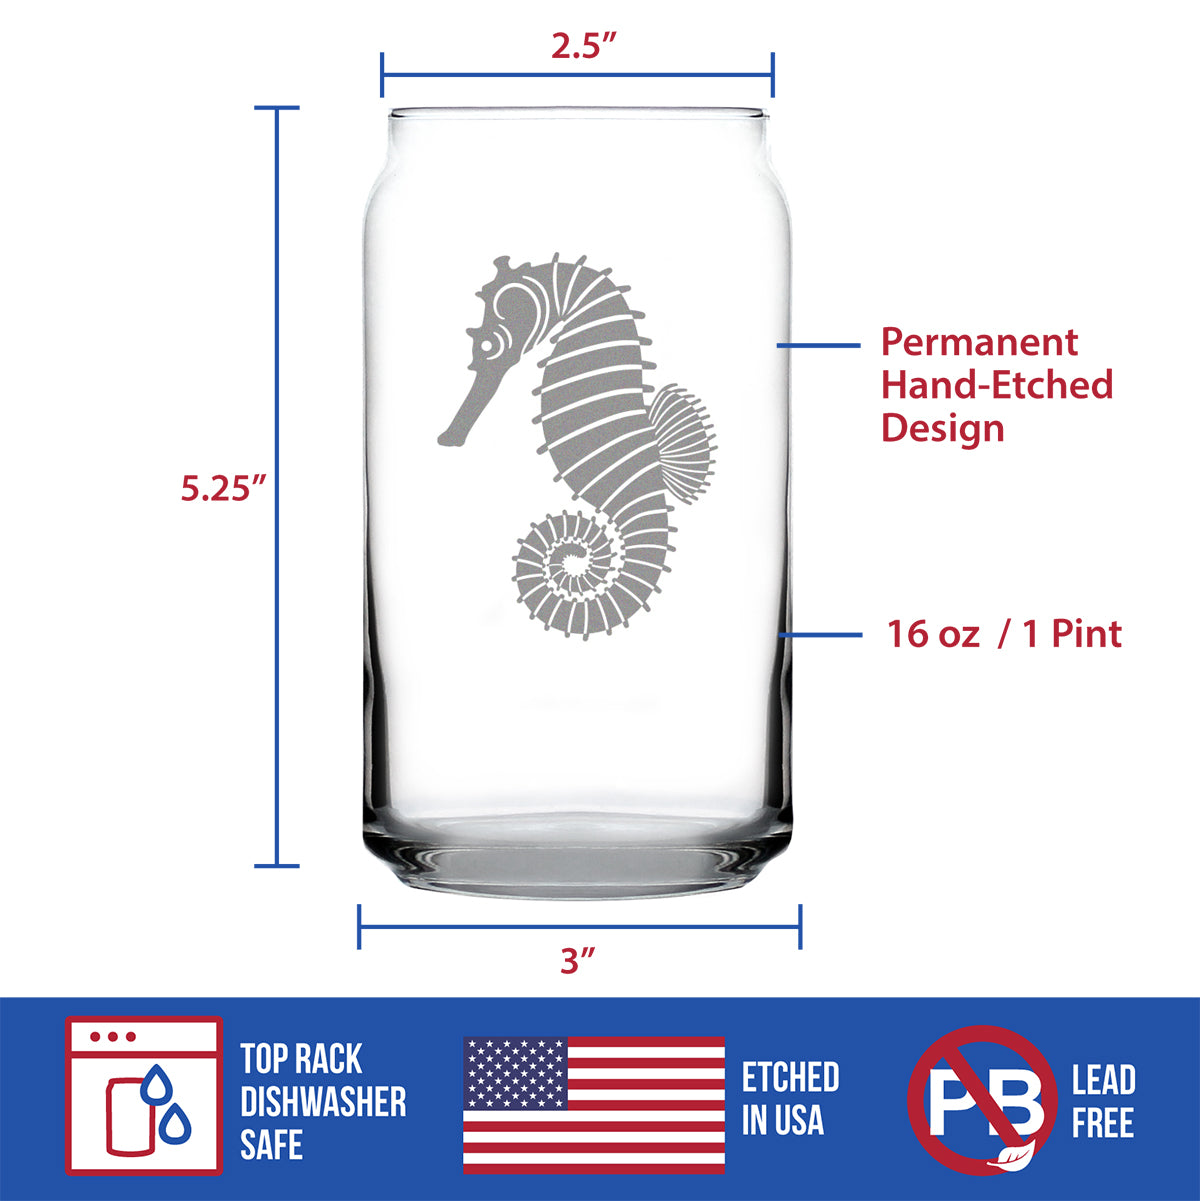 Seahorse Pint Glass for Beer - Unique Beachy Summer Gifts and Beach Ho -  bevvee